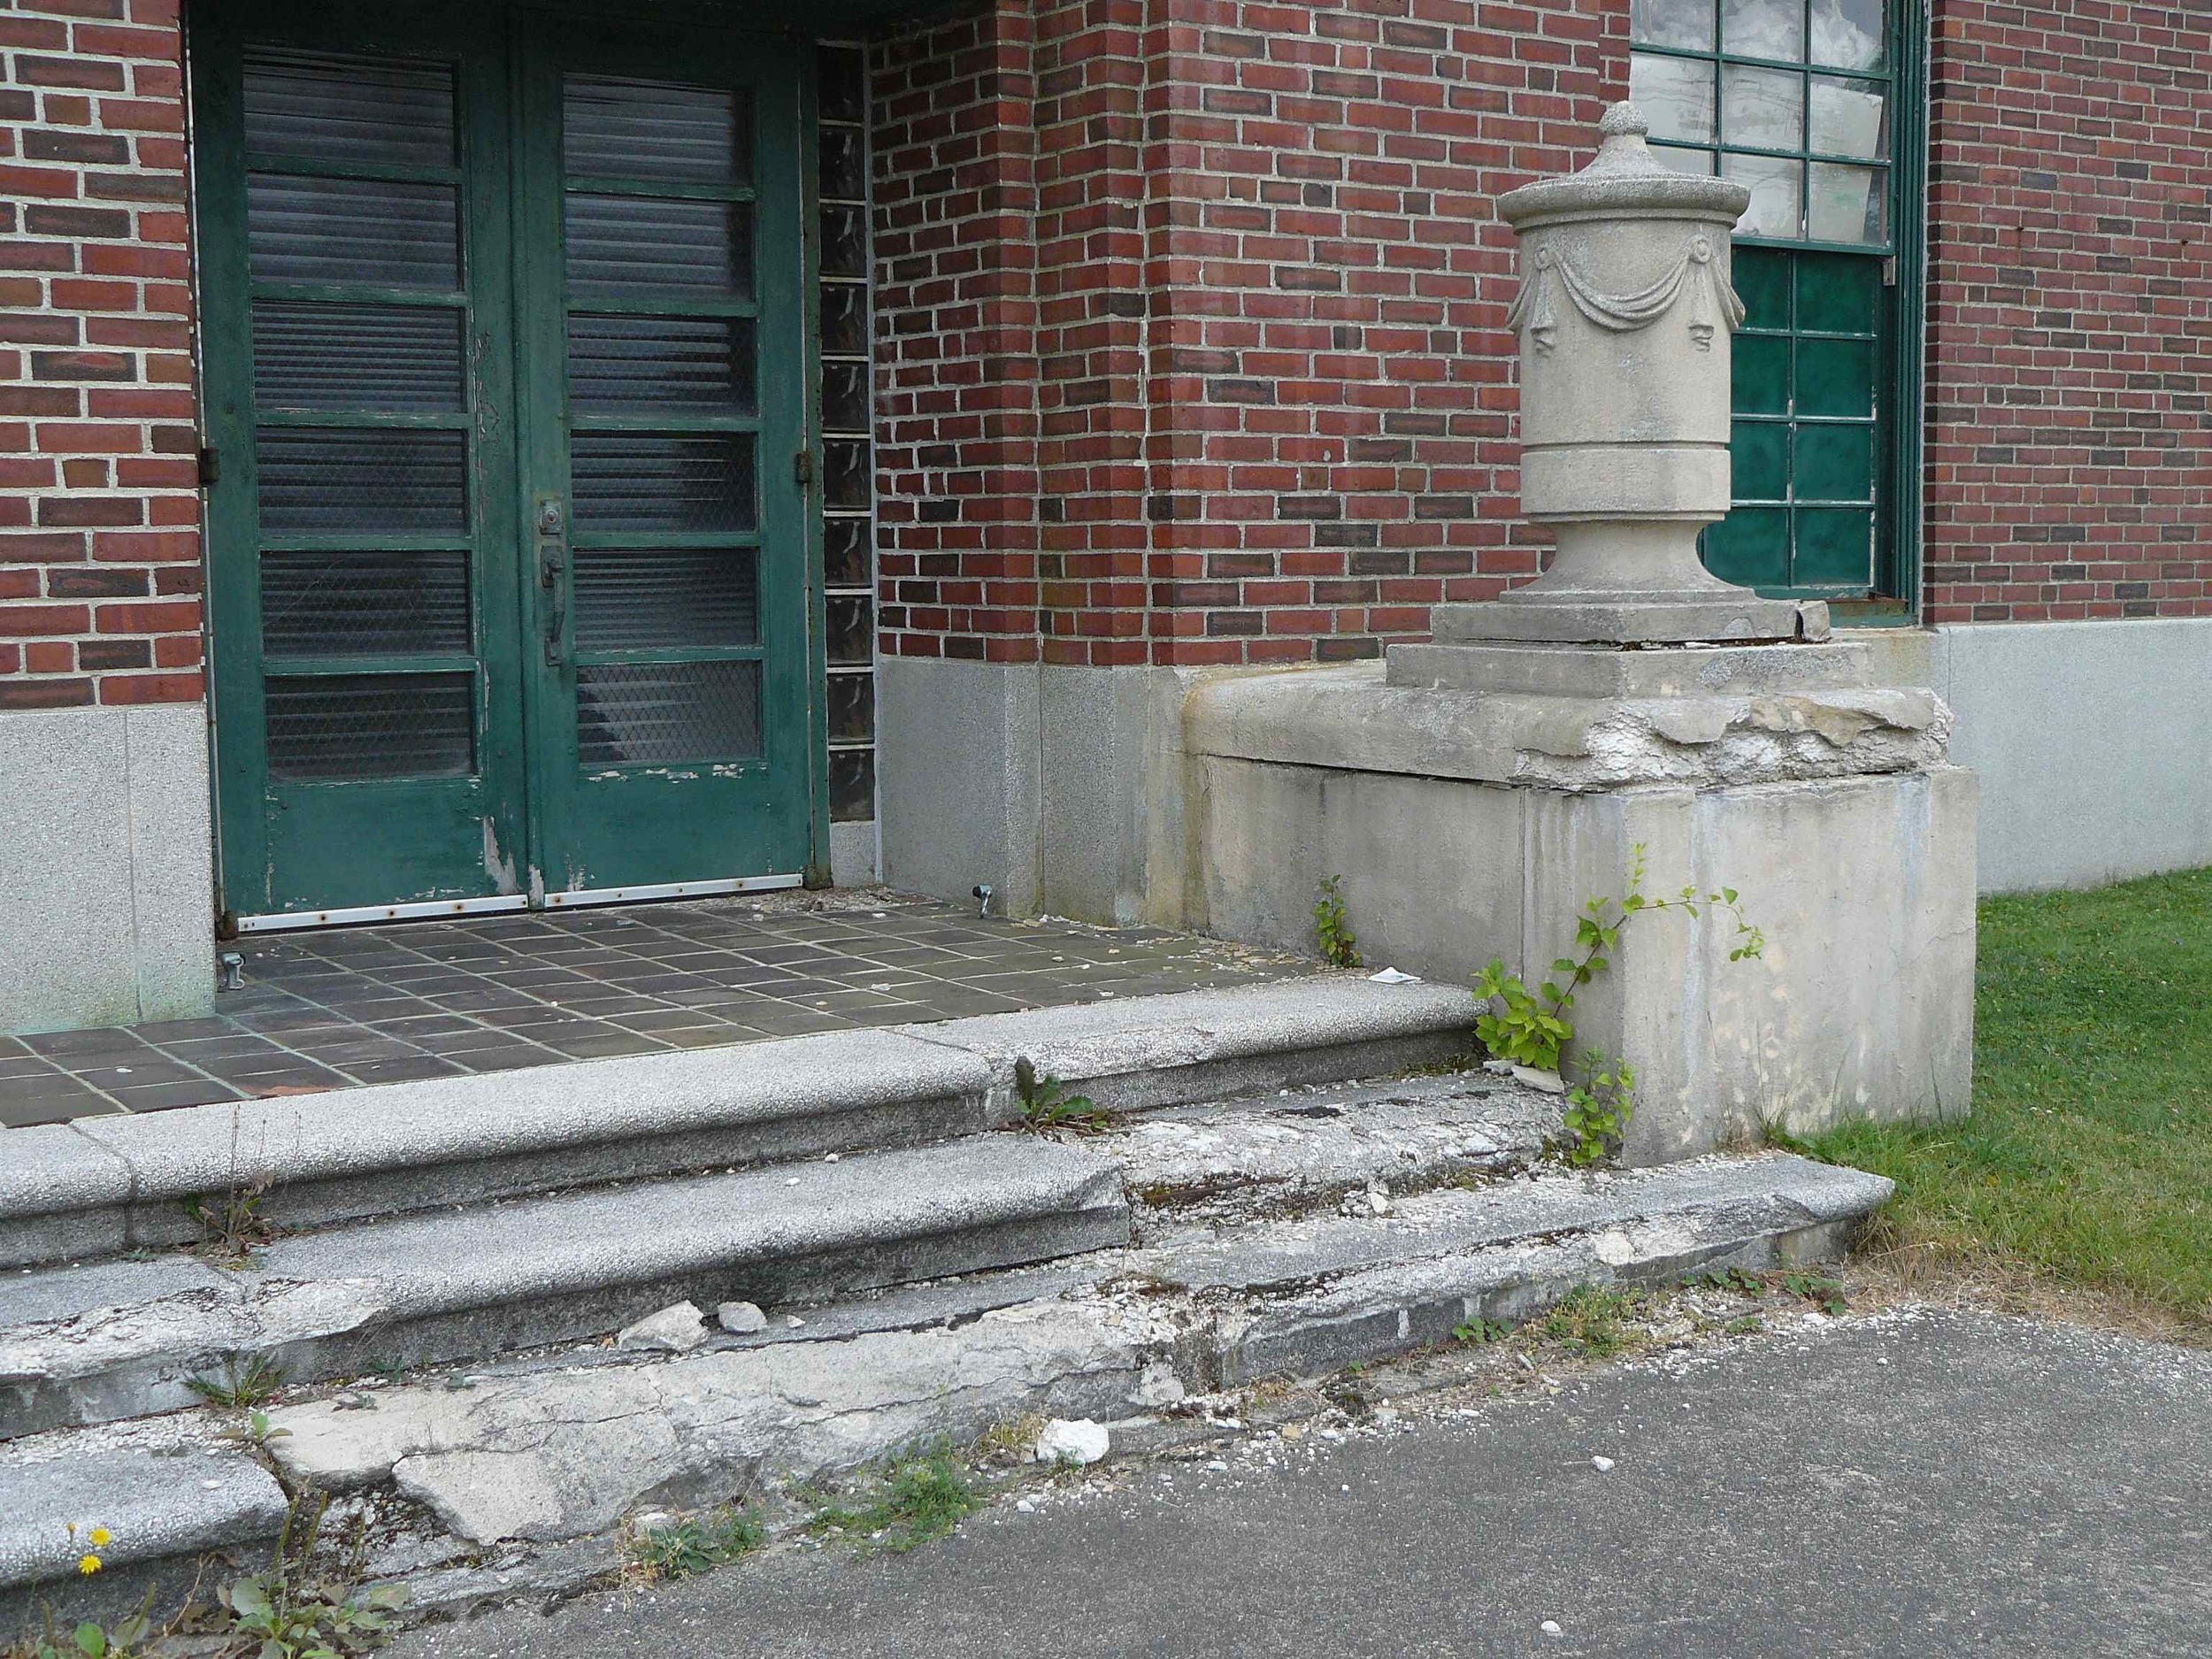 South_Portland_Armory_front_cracked_steps_01.jpg